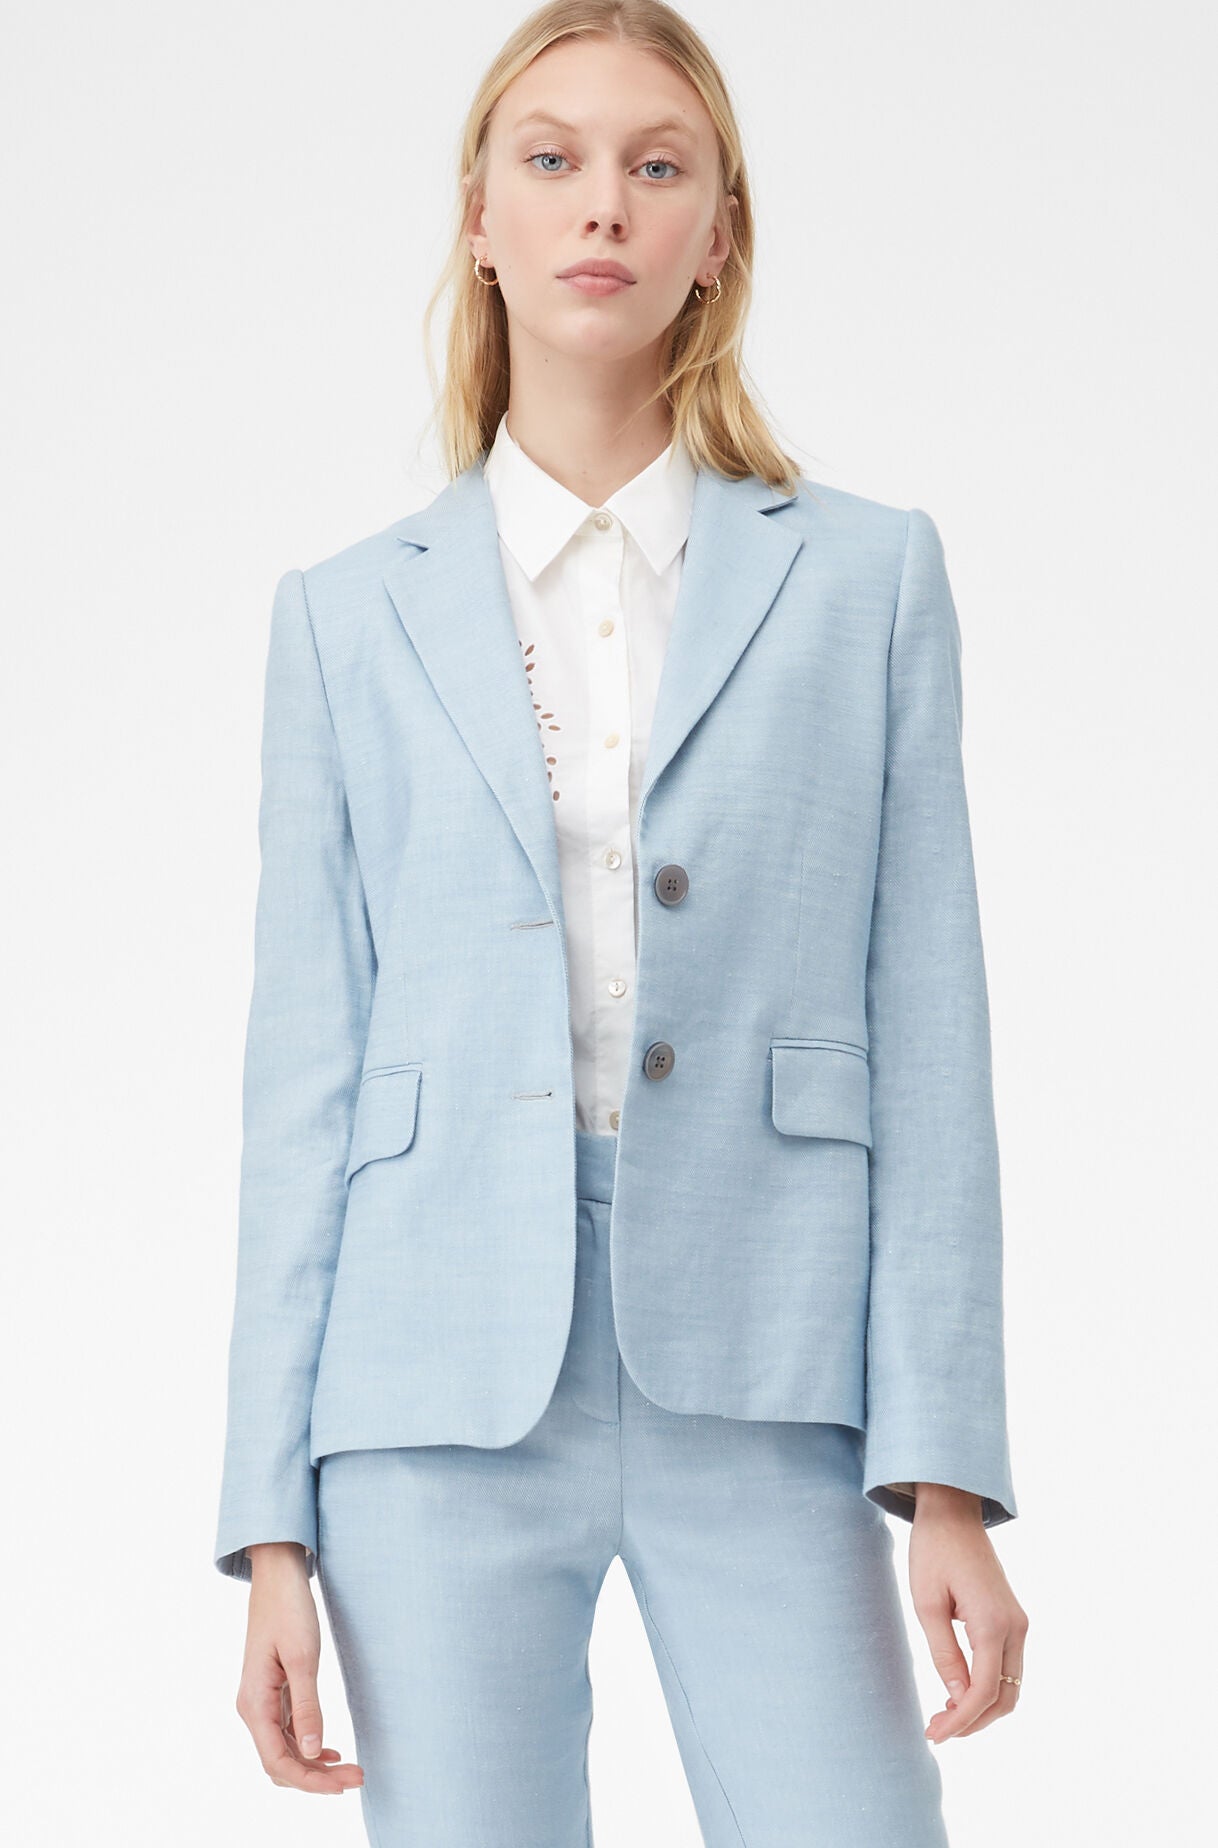 Rebecca Taylor | Tailored Twill Suiting Jacket in Washed Blue | Rebecca ...